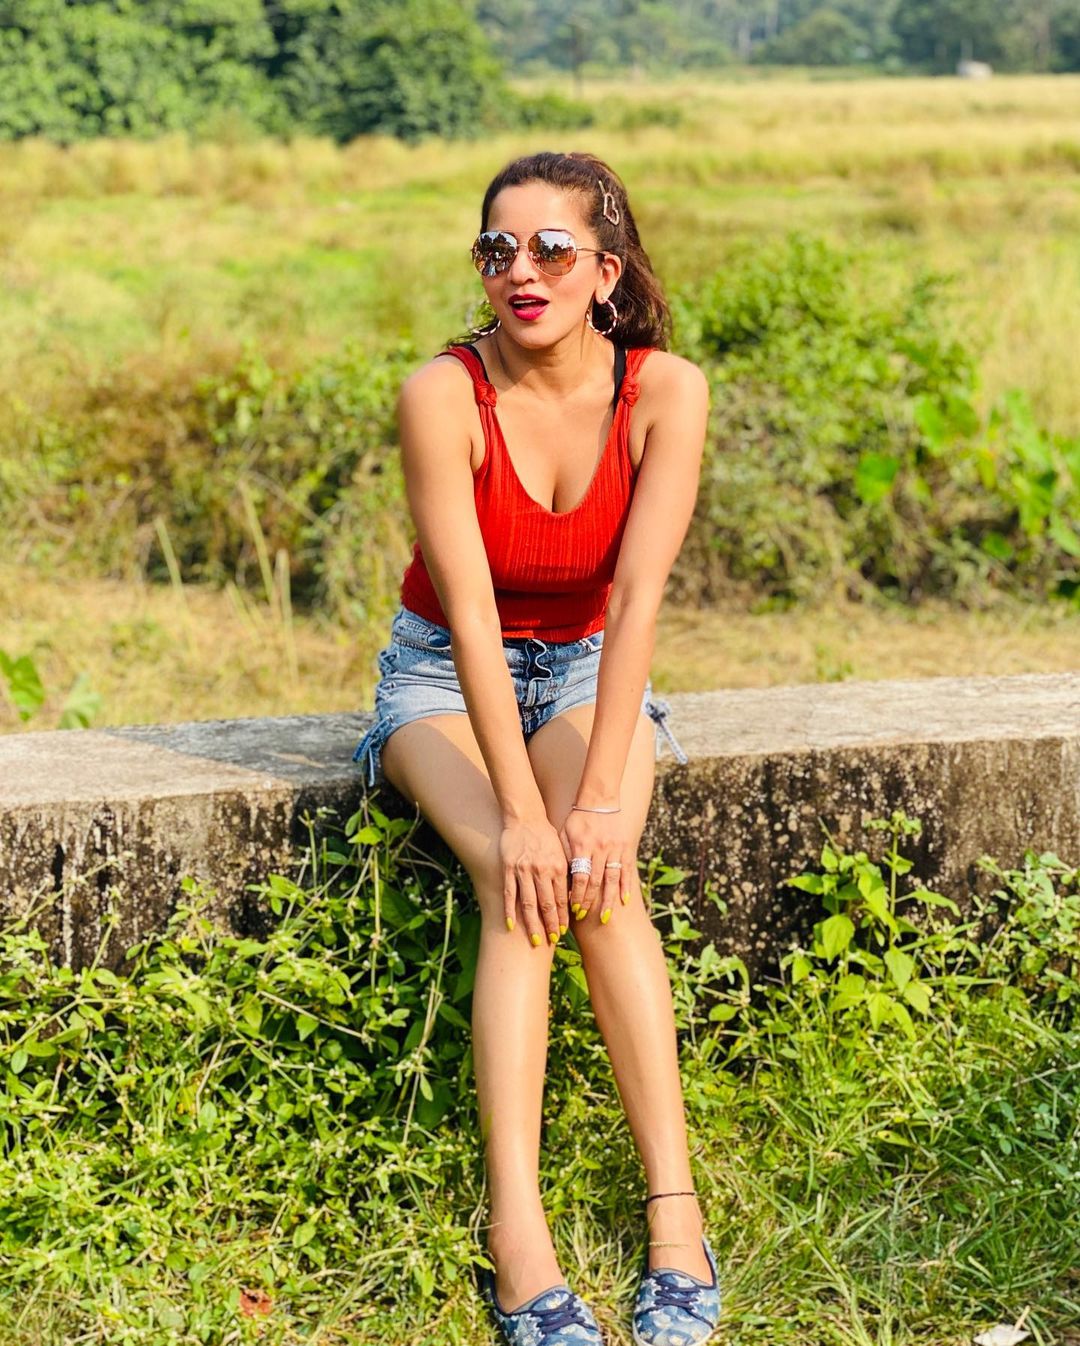 Monalisa aka Antara Biswas's HOT pictures from her Goa vacation goes viral! 2